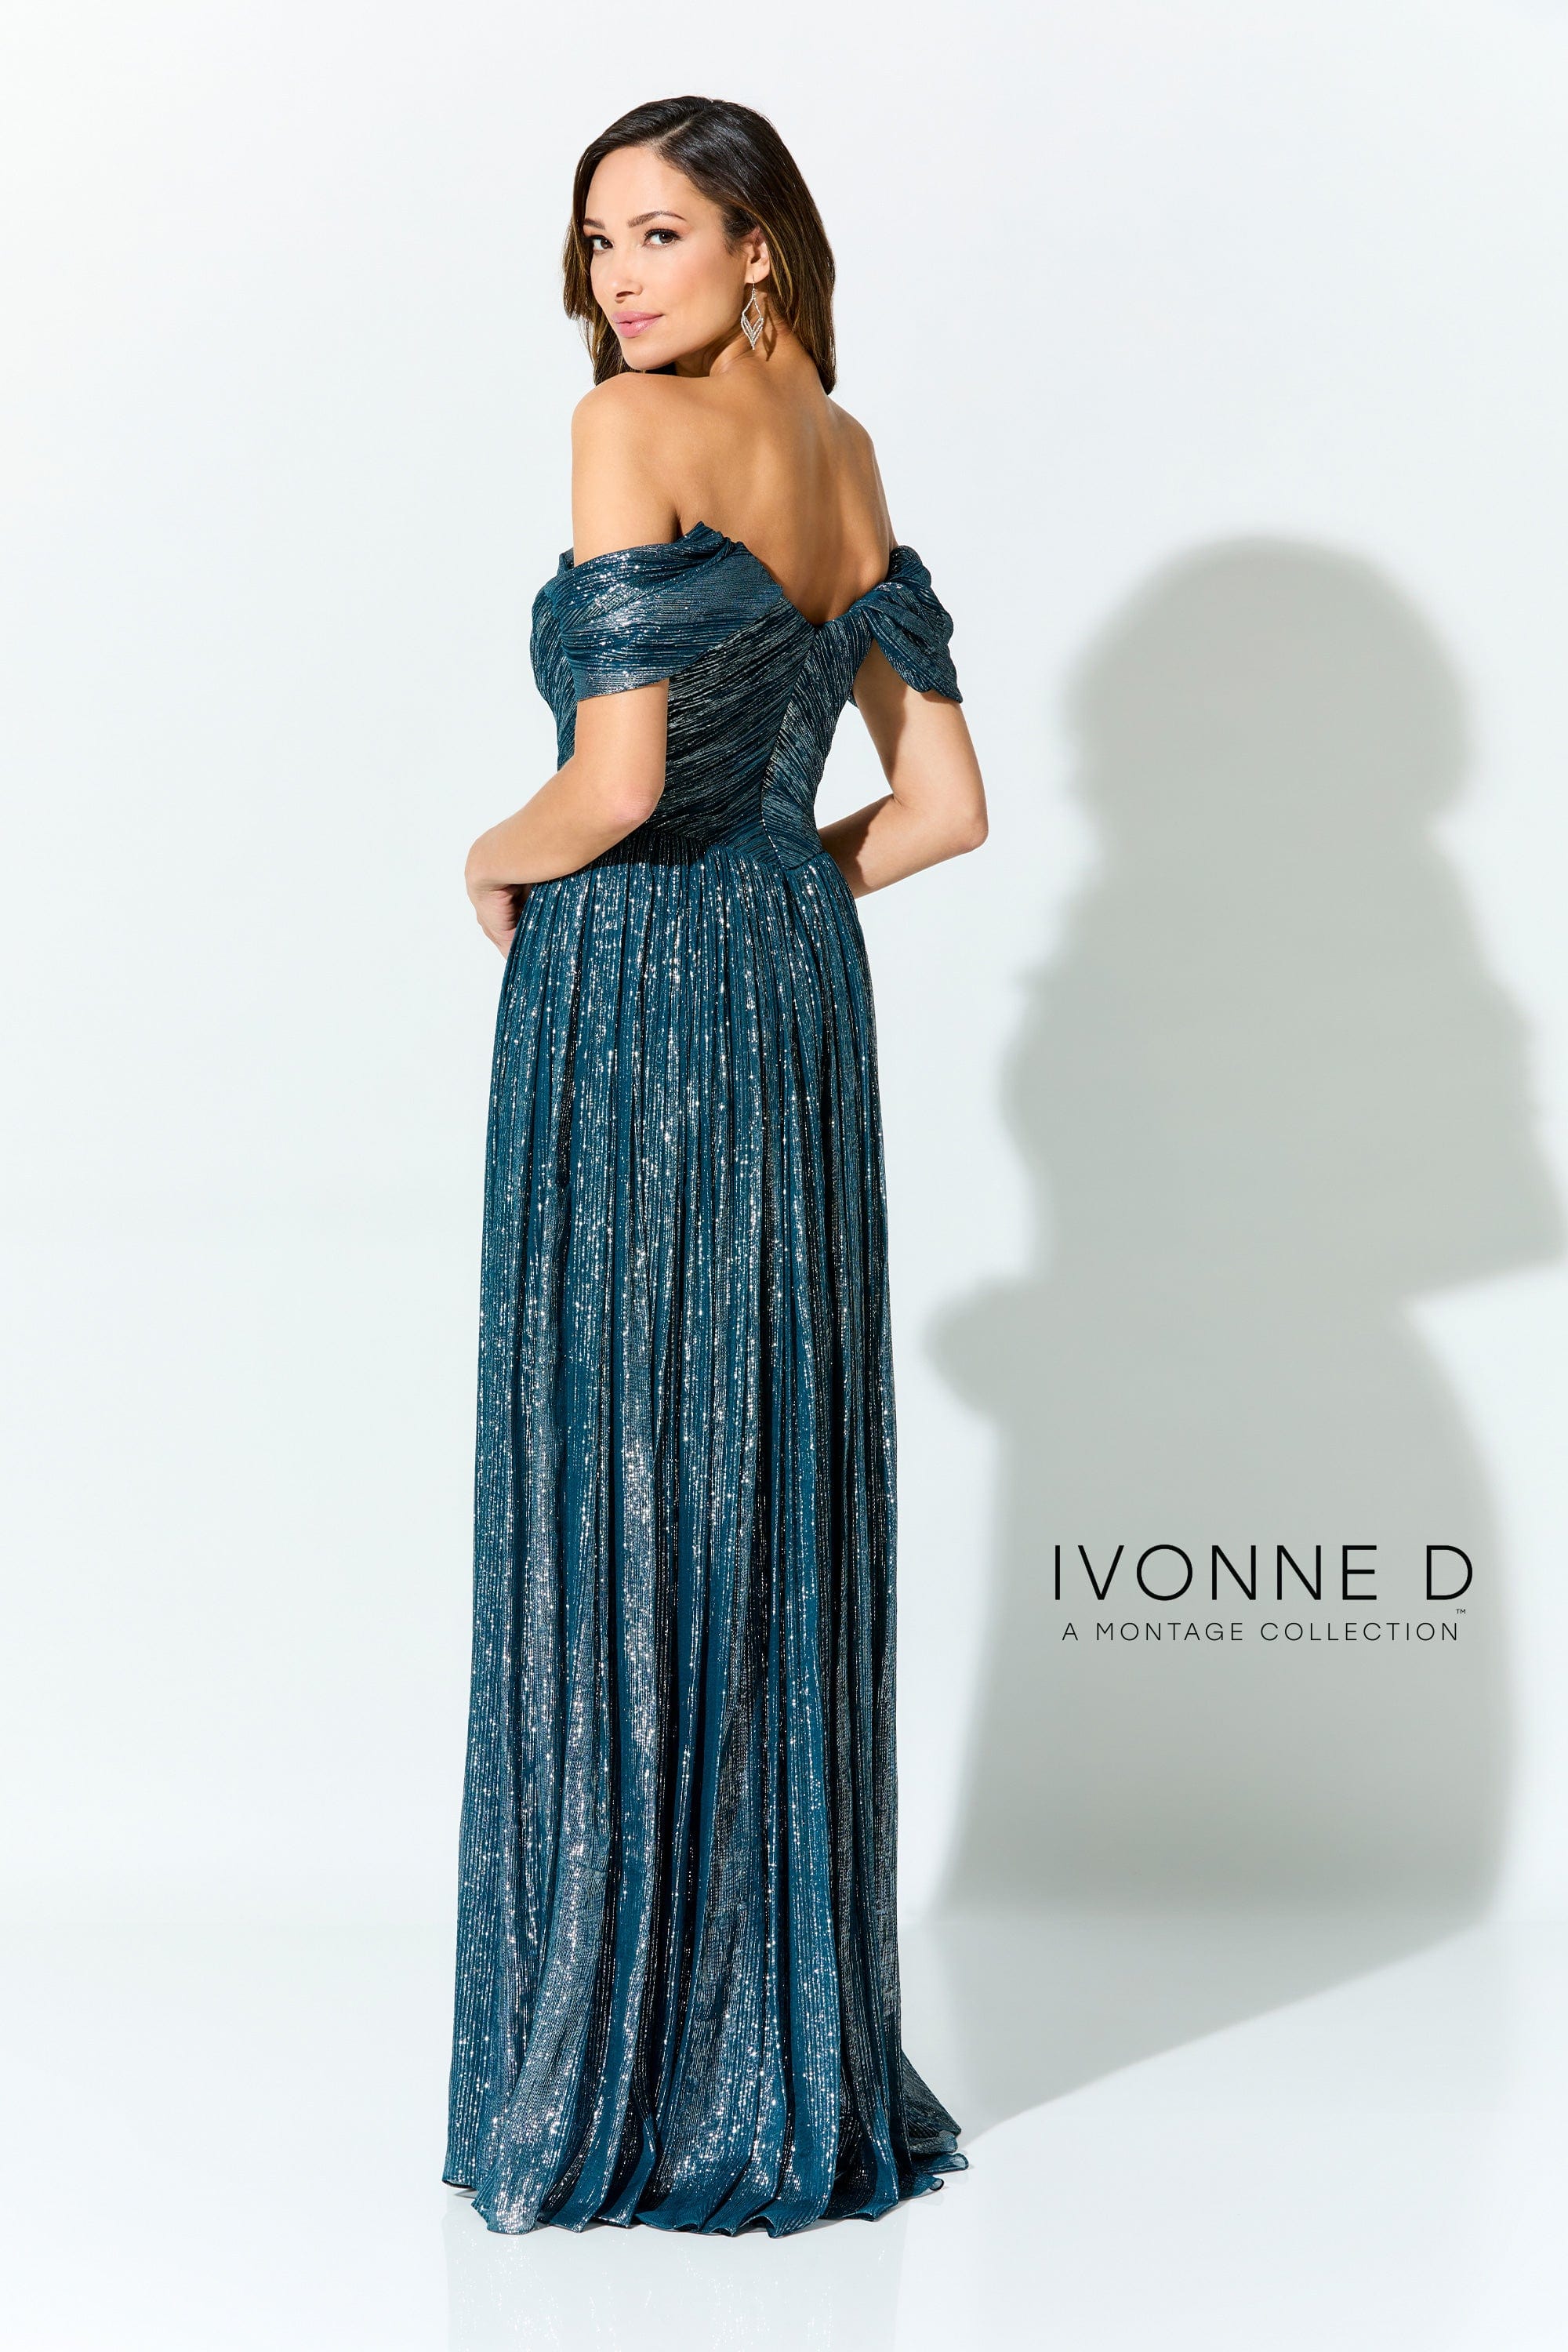 Slate Blue Lace New Style Evening Dress 2022 Color Luckgirls Pleated Beaded  Sleeveless Customizable Fashion Moncini Tailor - Evening Dresses -  AliExpress